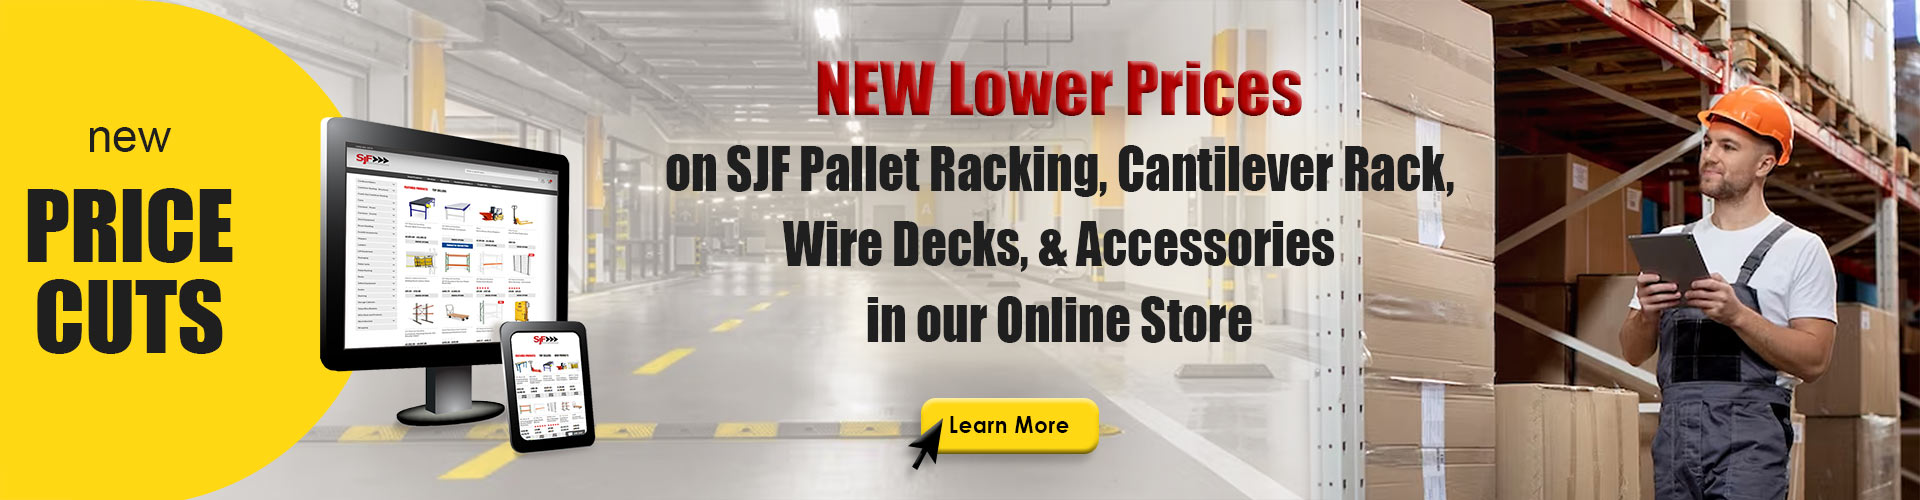 We've lowered prices on racking